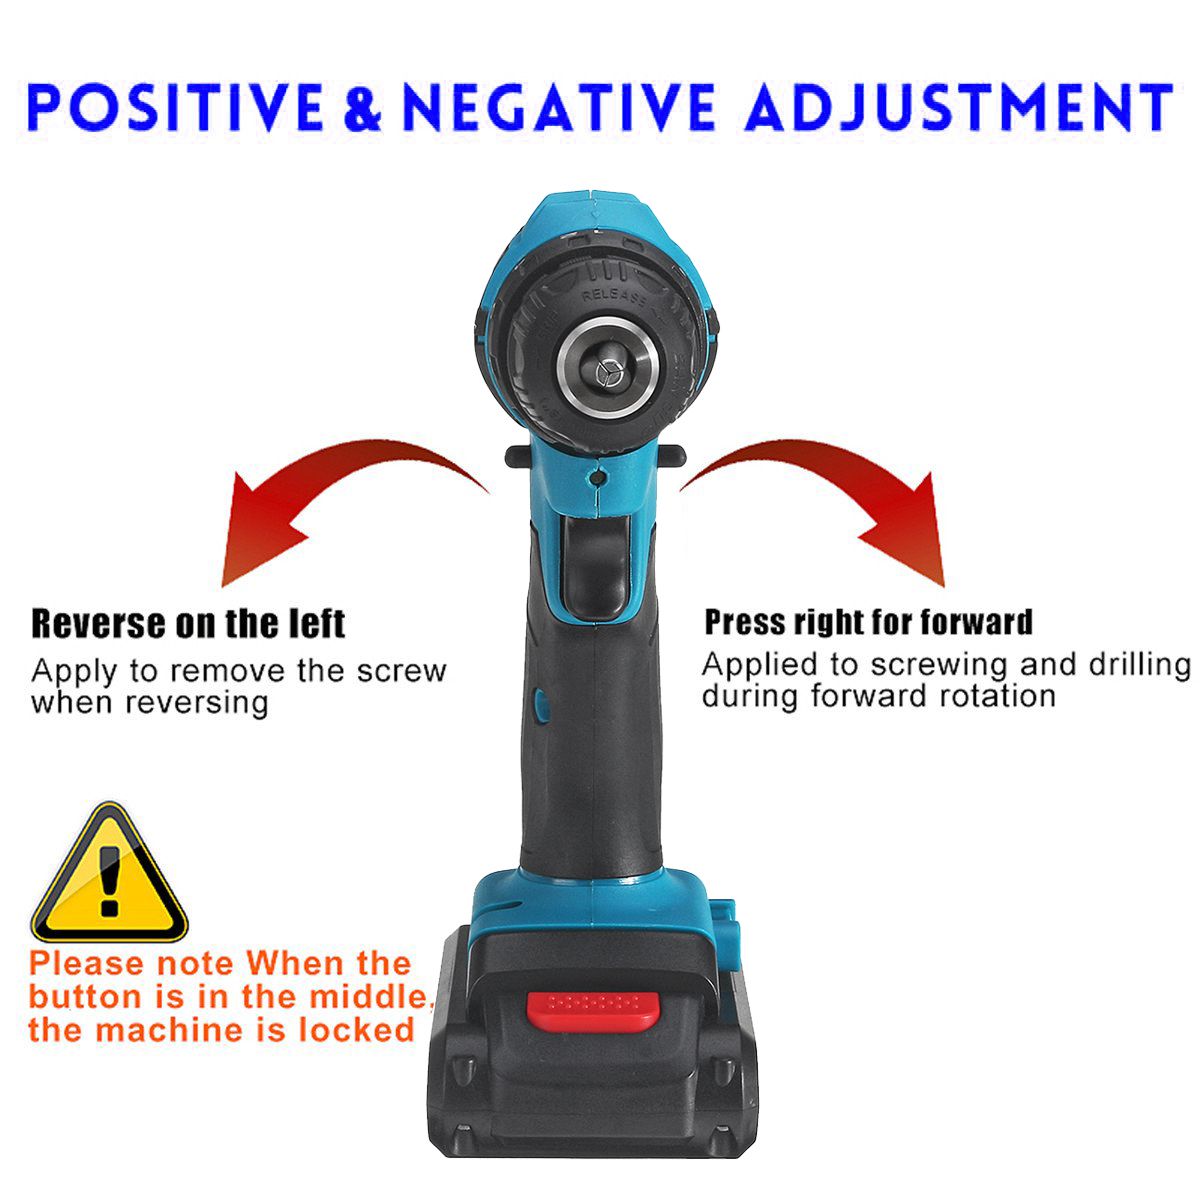 Drillpro-88VF-Cordless-Electric-Impact-Drill-Li-ion-Battery-Rechargeable-253-Torque-Screwdriver-Bit-1523062